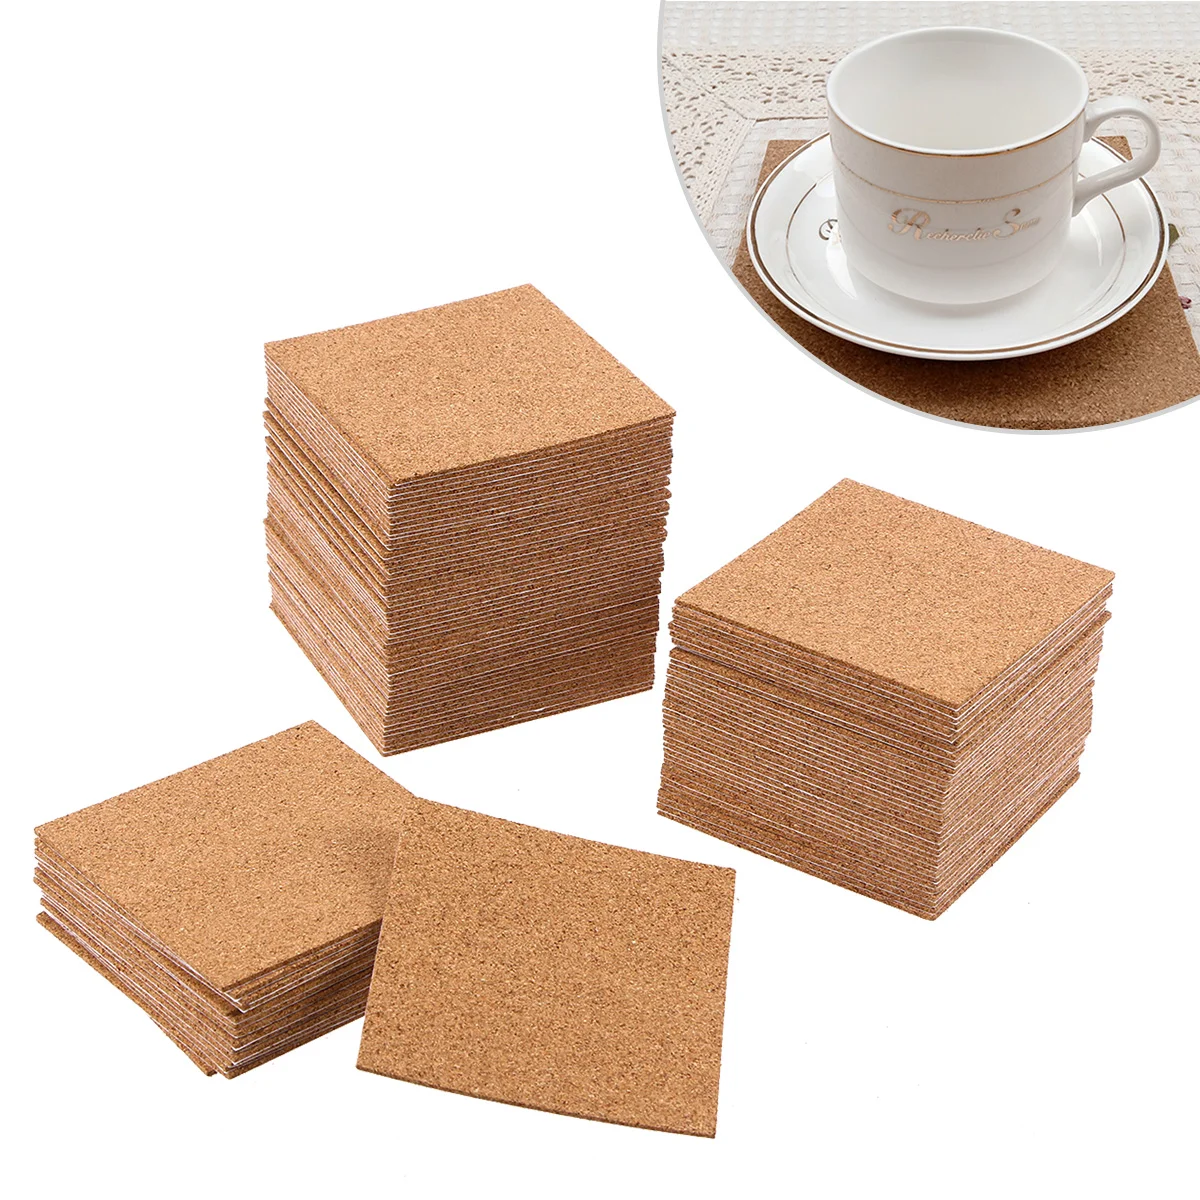 

Cork Adhesive Coasters Self Sheets Pads Cup Coaster Backing Square Mat Board Tiles Mats Squares Gasket Strip Wooden Drink Spacer